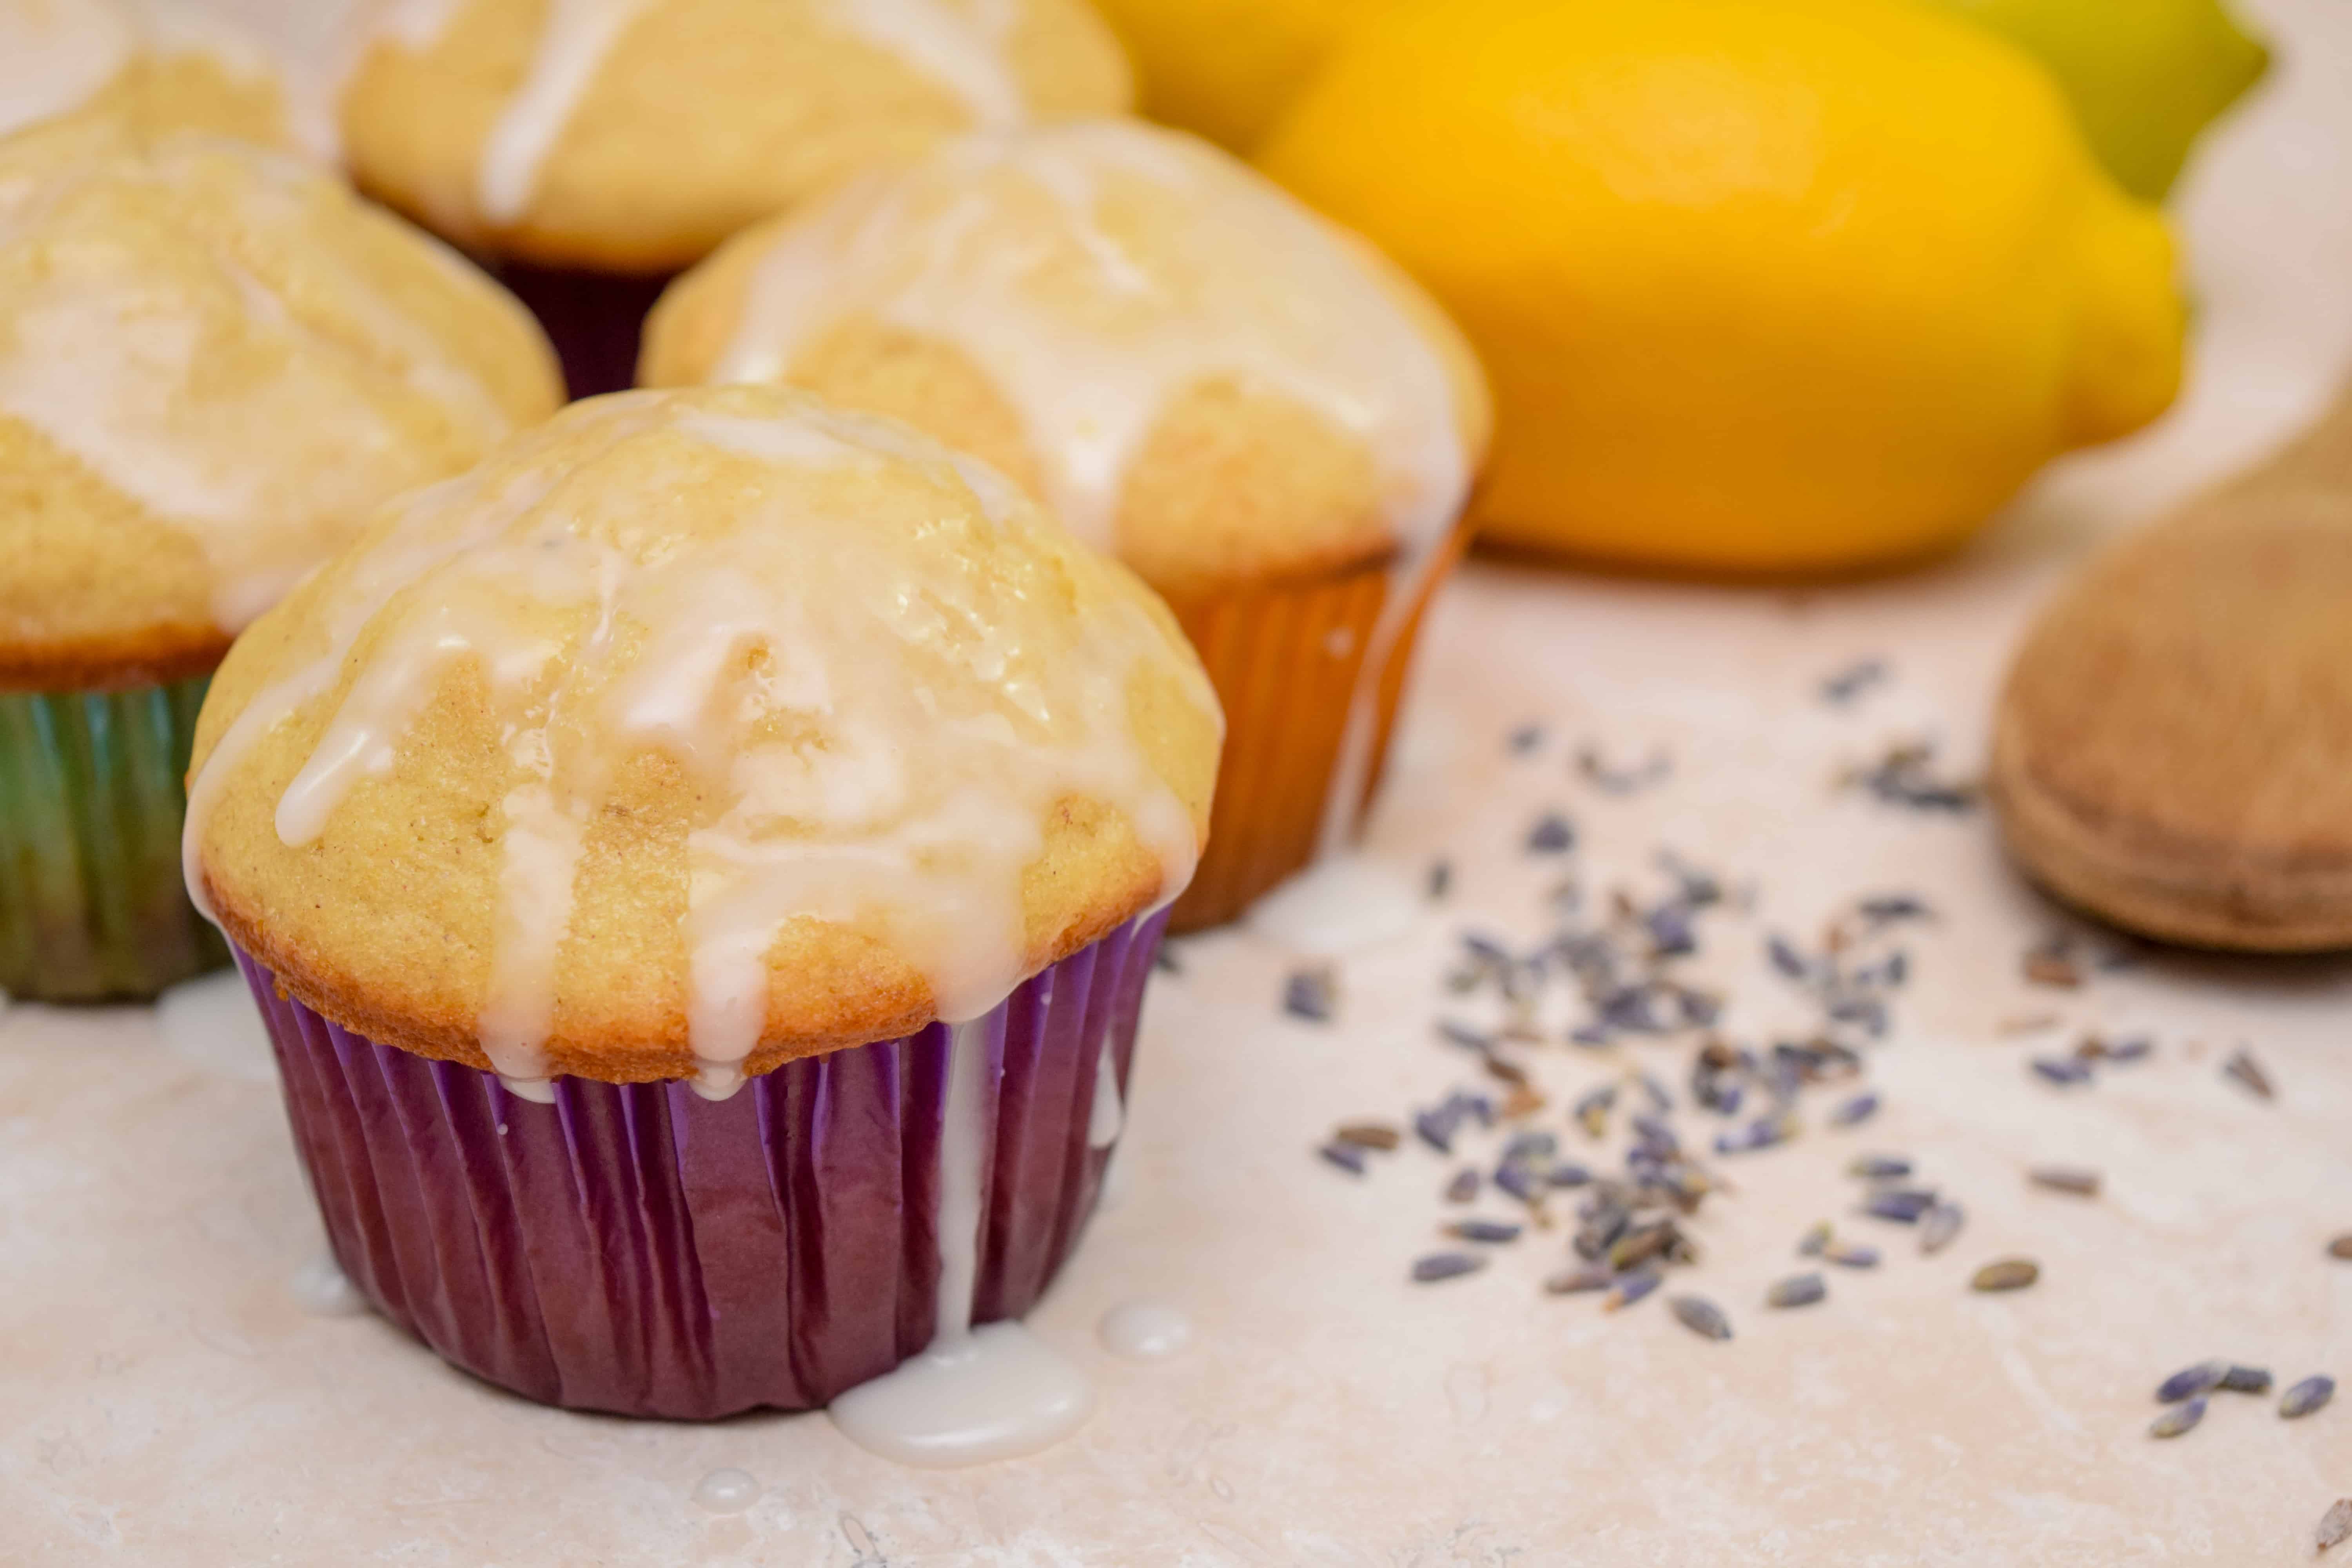 Lemon lavender muffins perfect for Easter, Springtime, and Mother's Day!